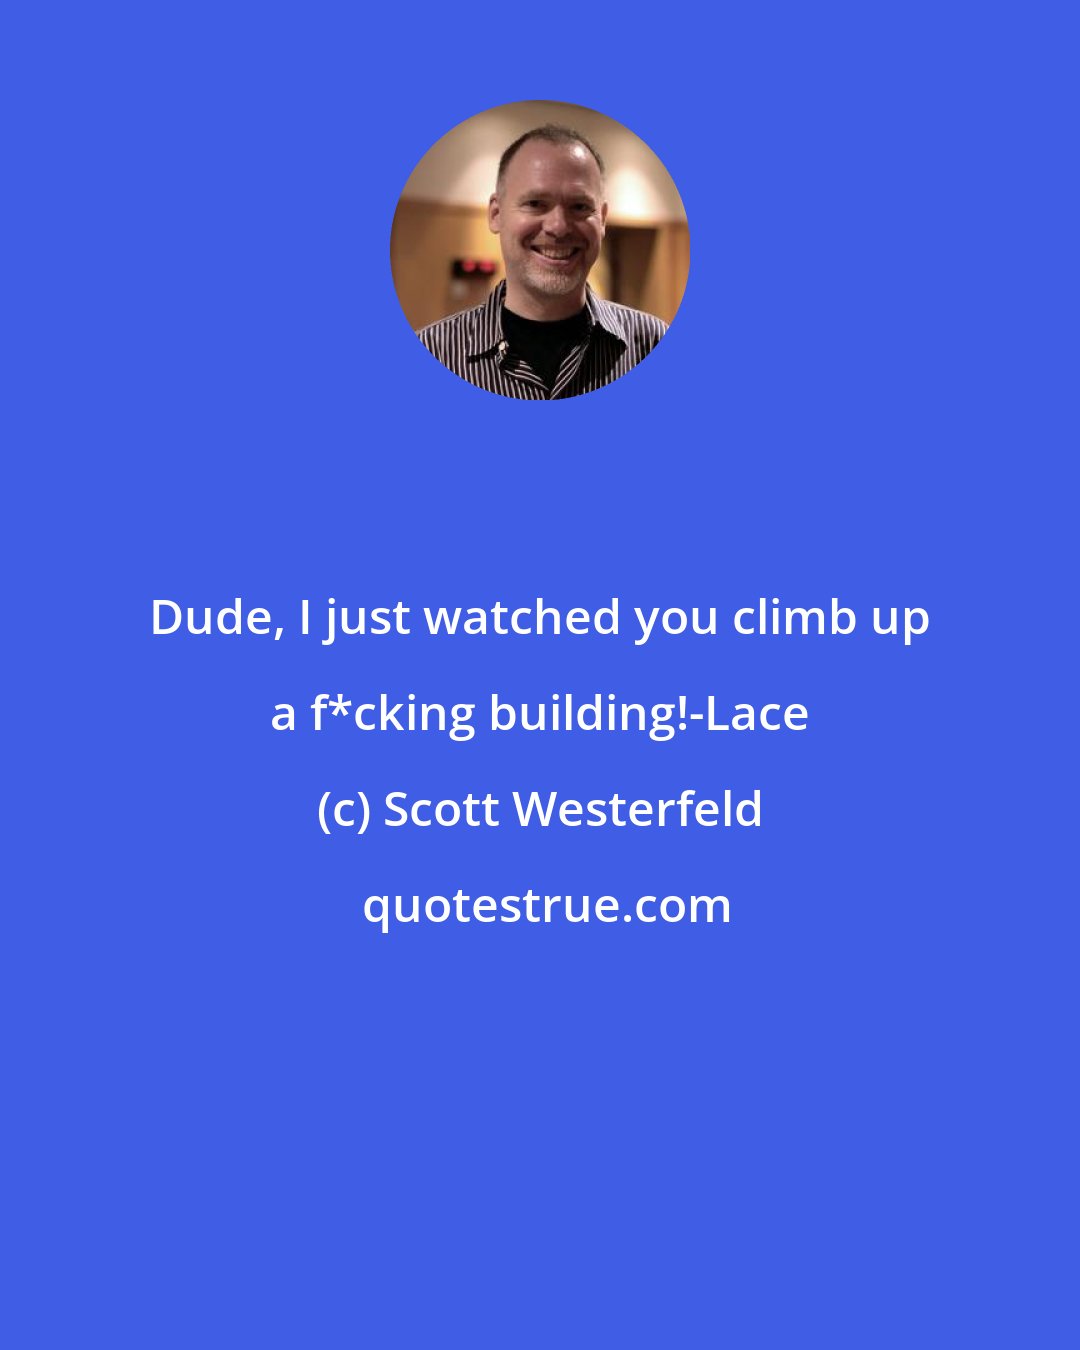 Scott Westerfeld: Dude, I just watched you climb up a f*cking building!-Lace